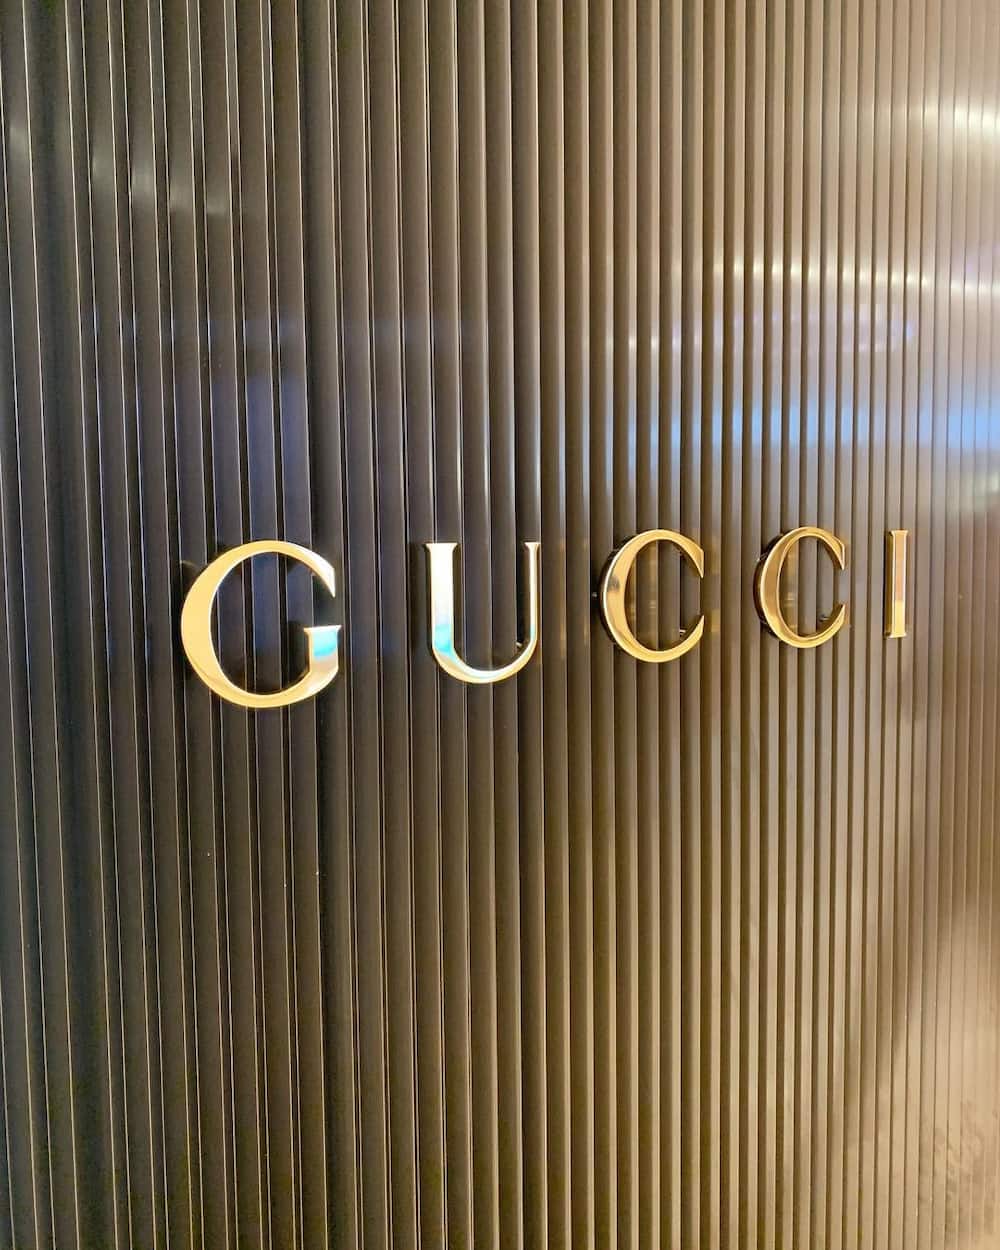 Gucci T-shirt prices